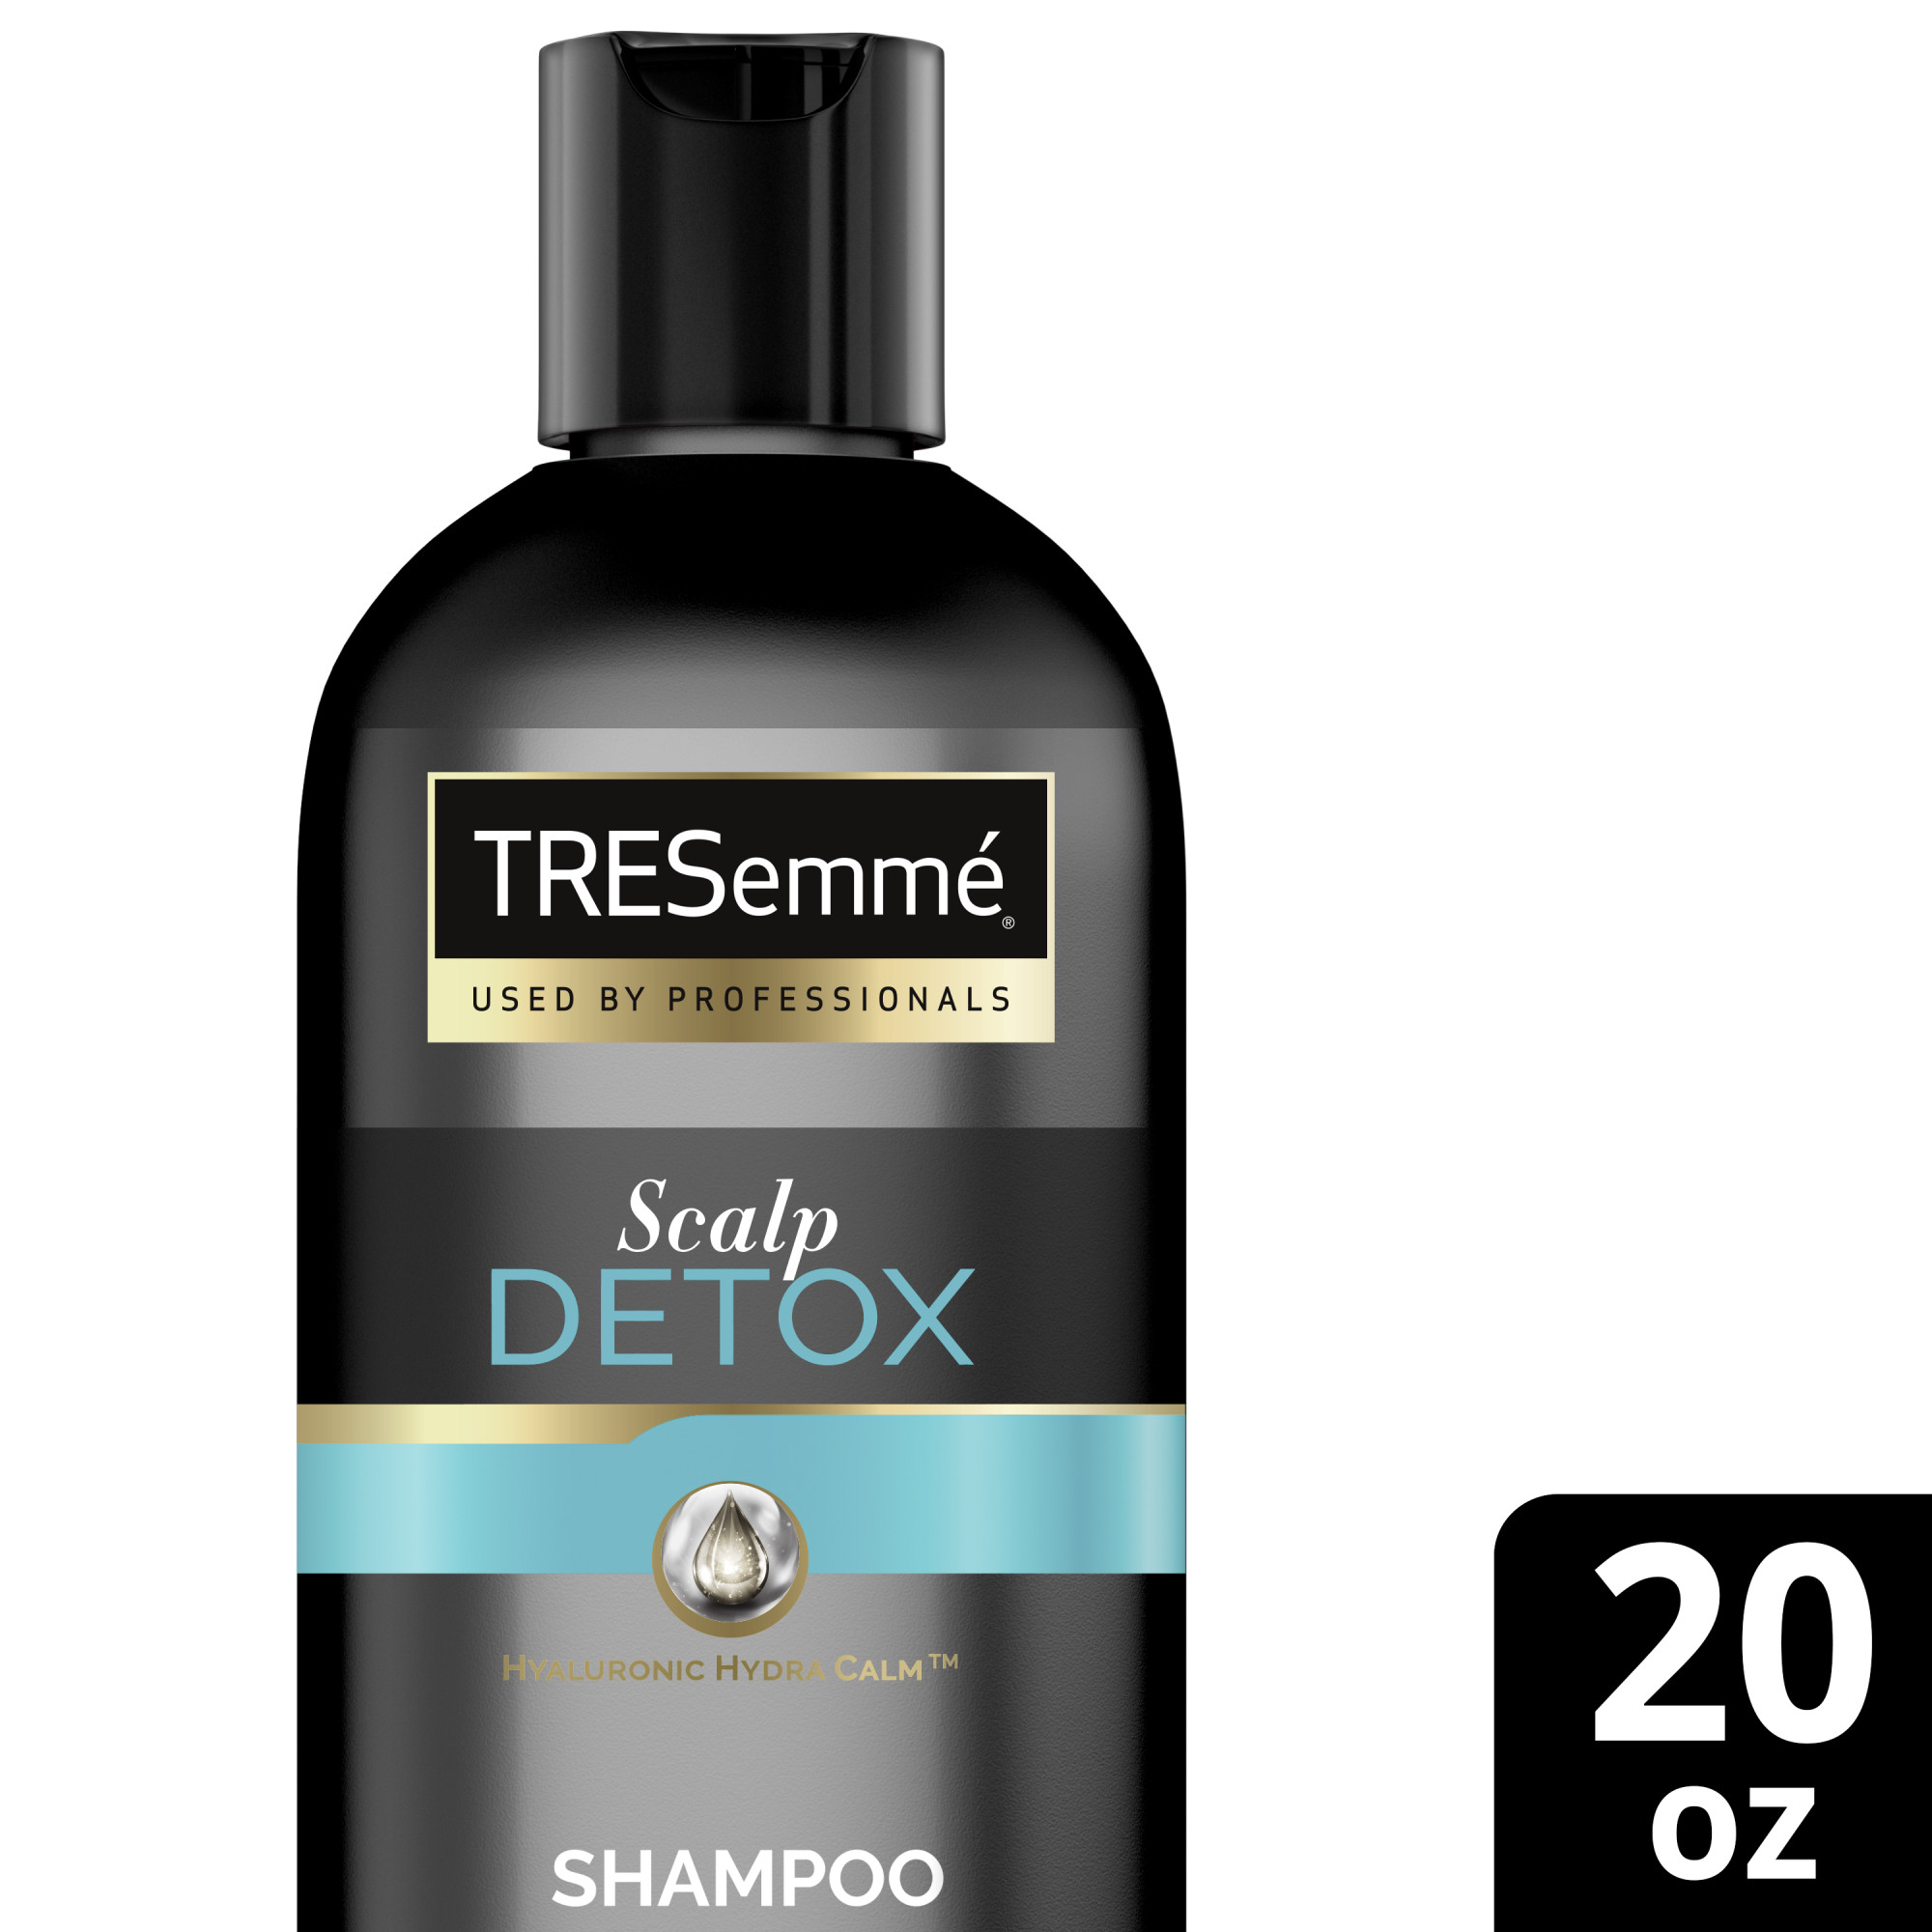 Tresemme Used by Professionals Moisturizing Scalp Detox Dandruff Relief Daily Shampoo, 20 fl oz - image 1 of 8